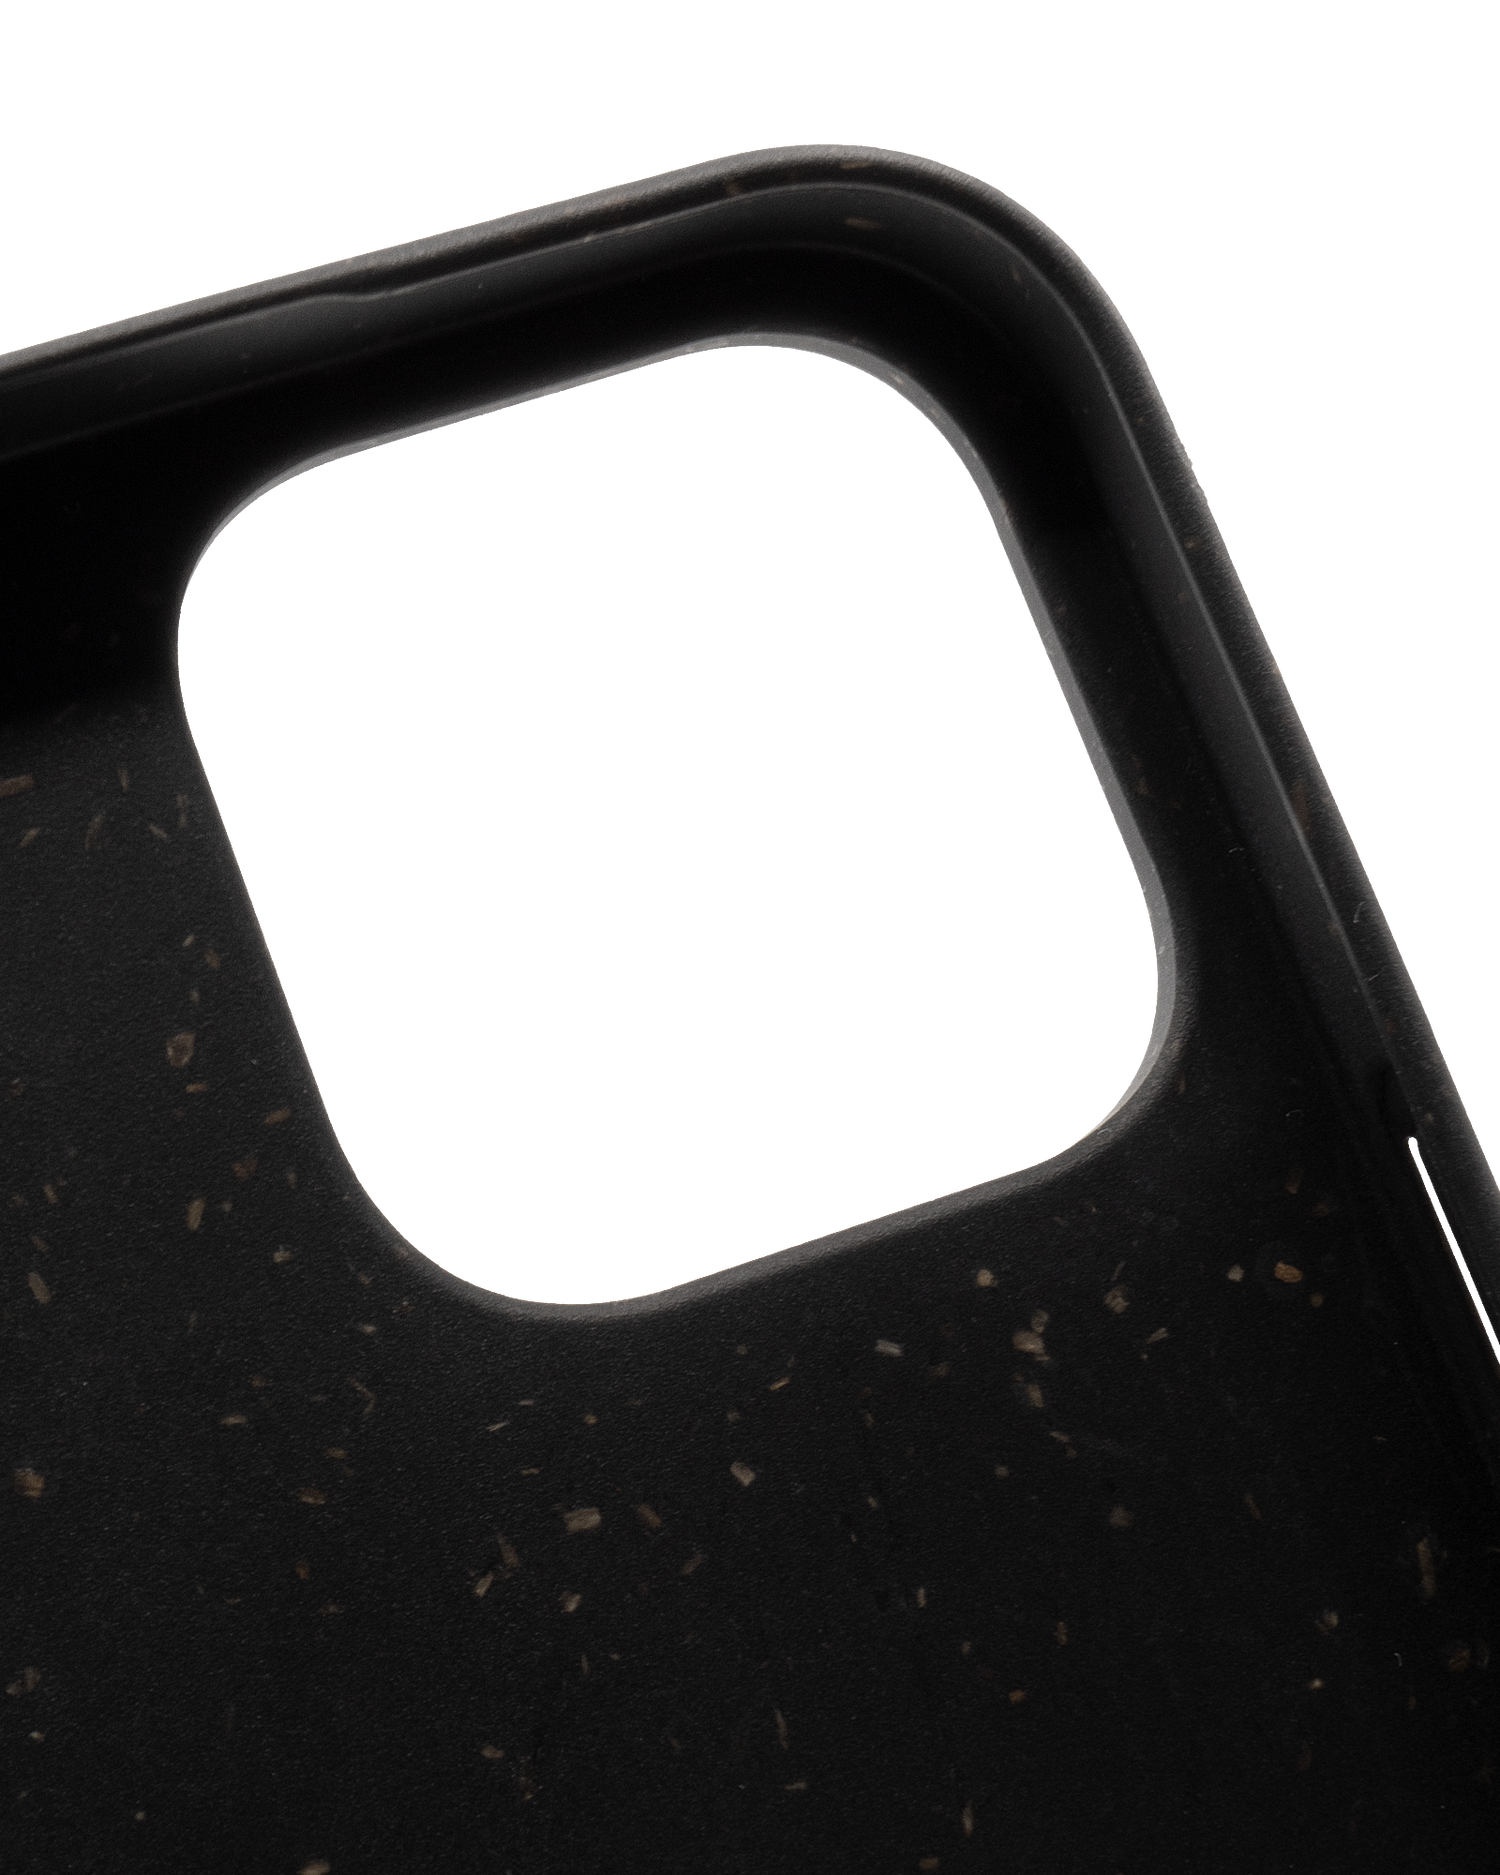 Black Eco-Friendly Phone Case for Apple iPhone 13 Pro Max: Details inside